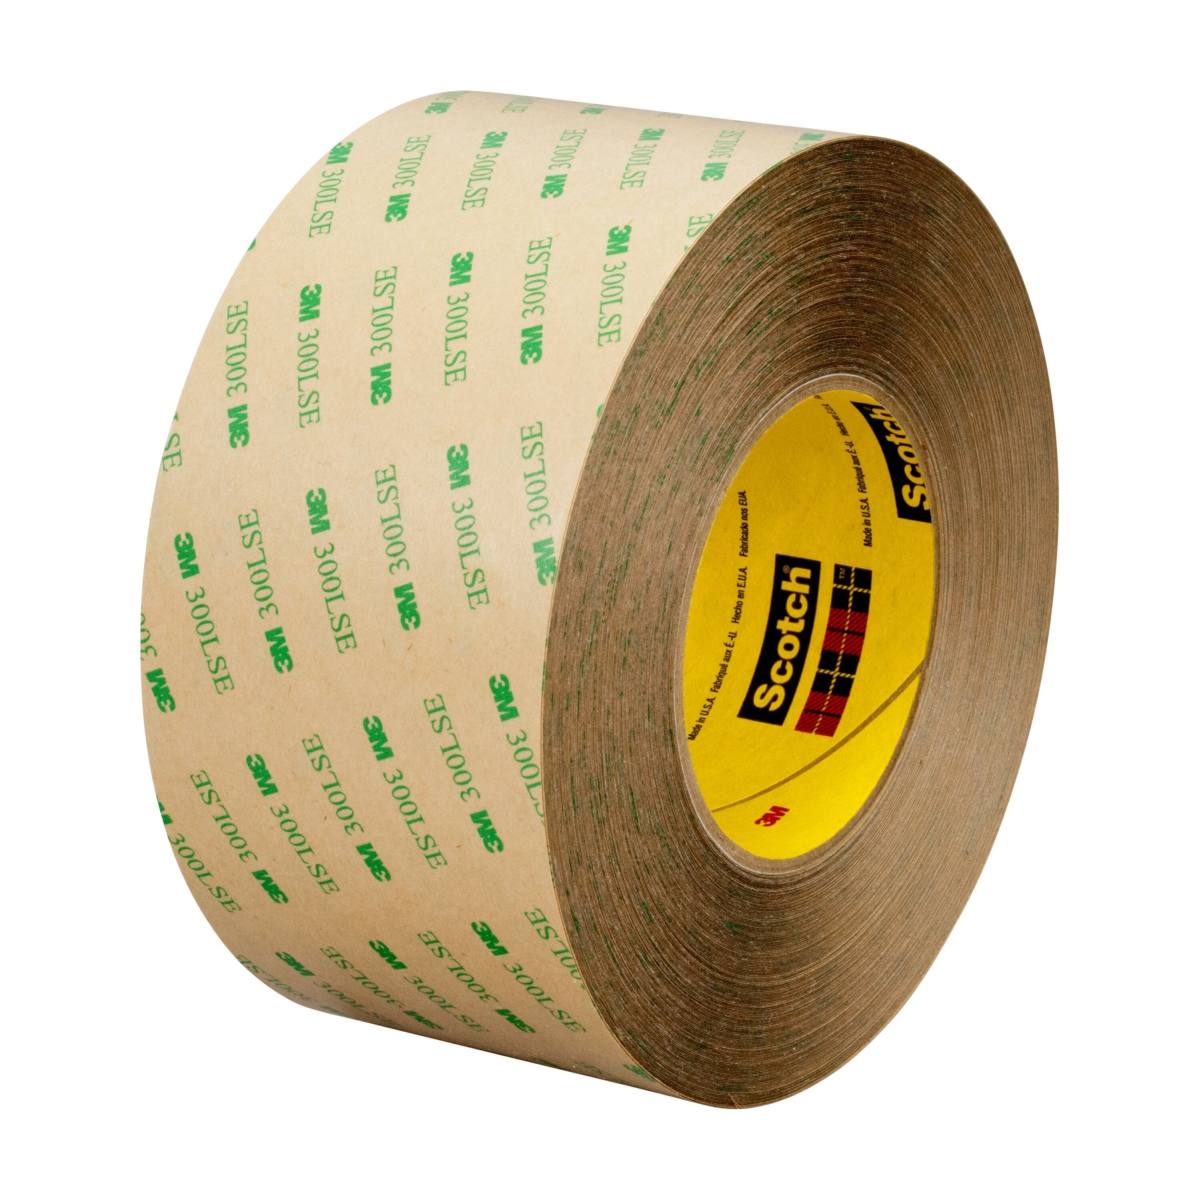 3M Dubbelzijdig plakband met polyester drager 93020LE, transparant, 6 mm x 55 m, 0,20 mm